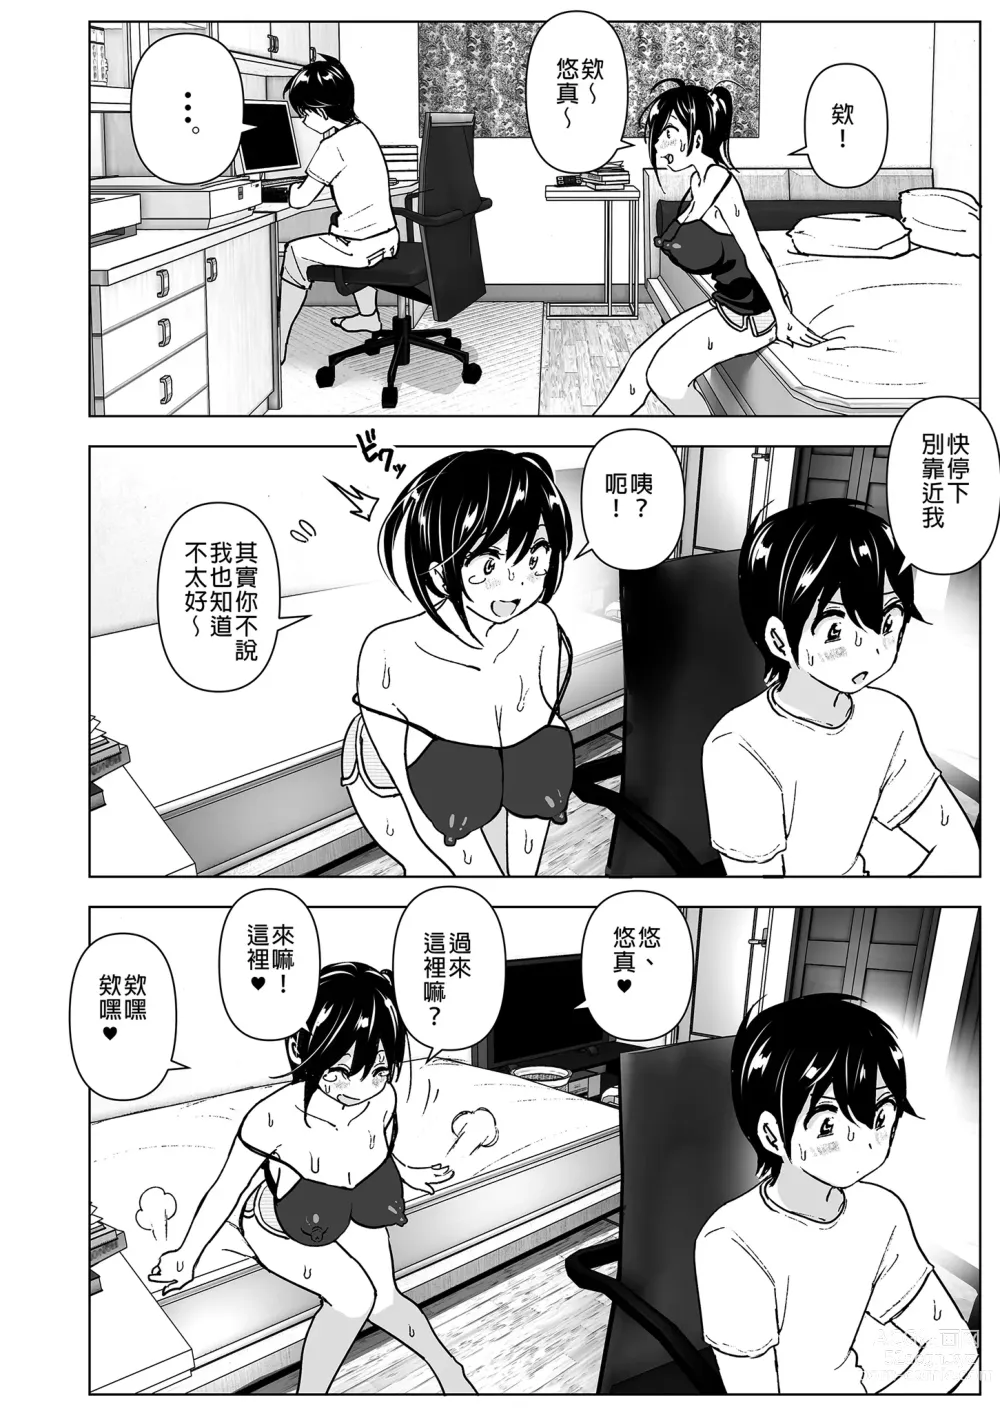 Page 6 of doujinshi 姊姊與傾聽怨言的弟弟